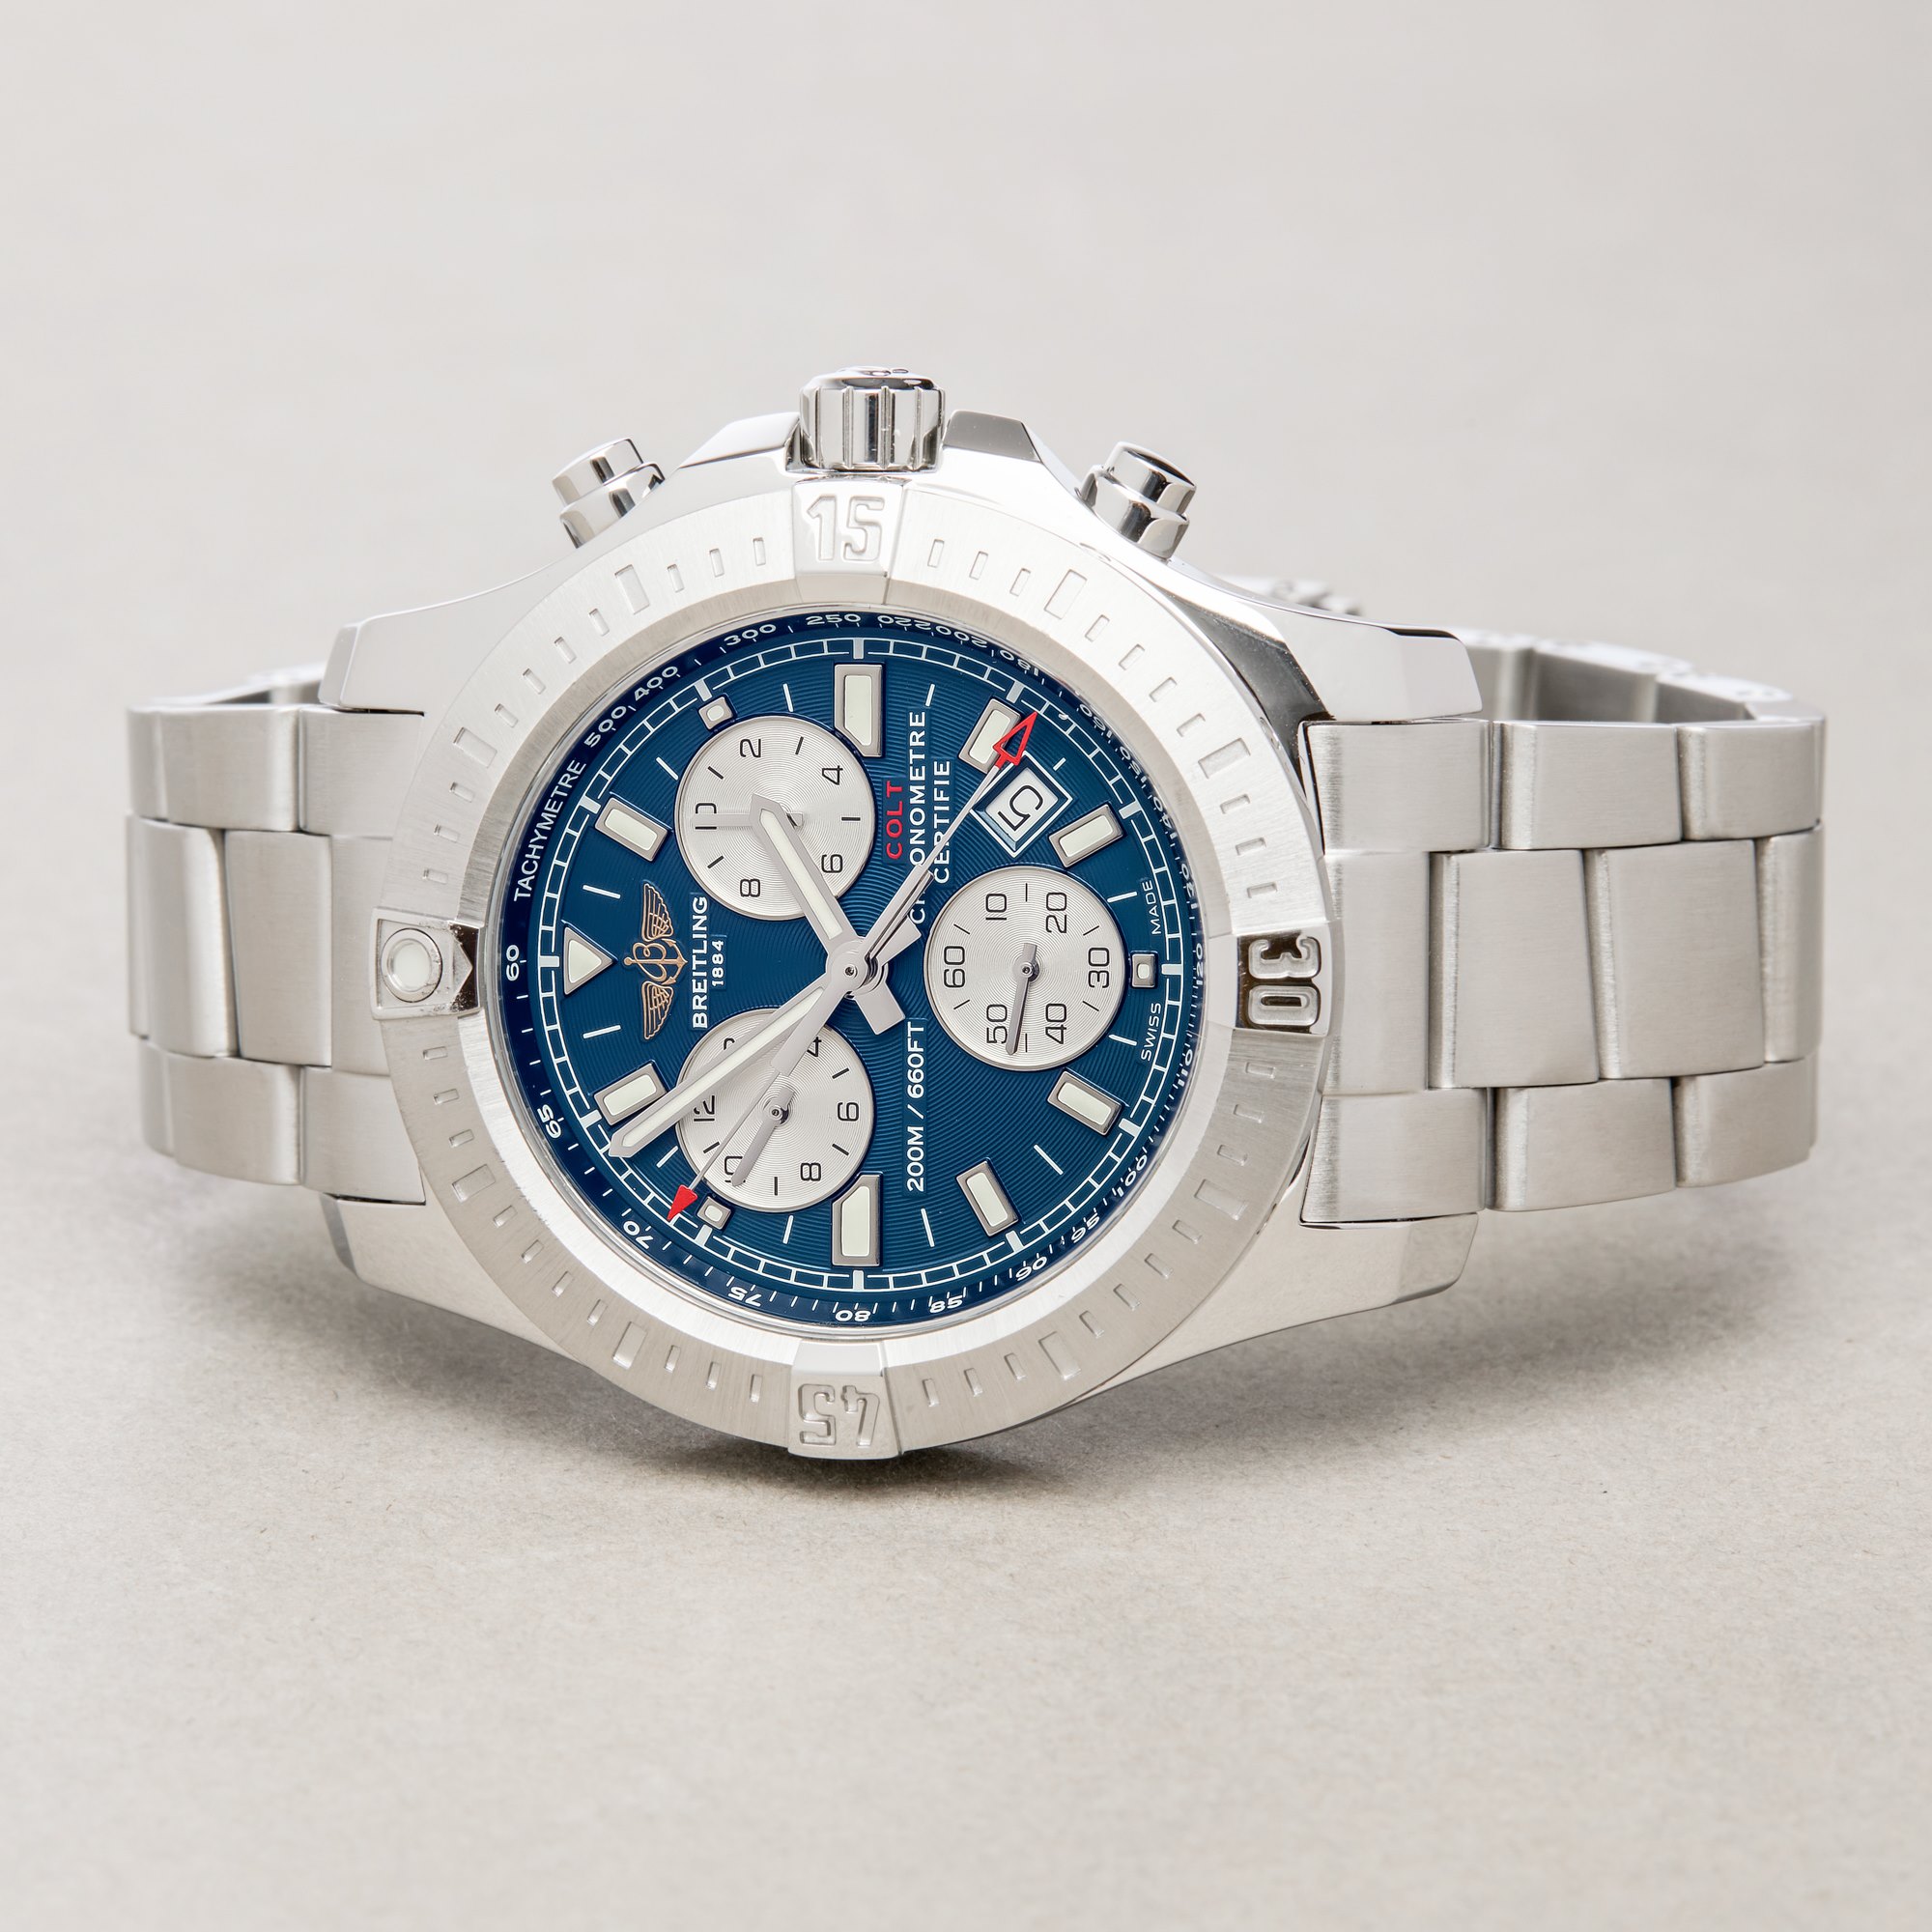 Breitling Colt Chronograph II Stainless Steel A73388